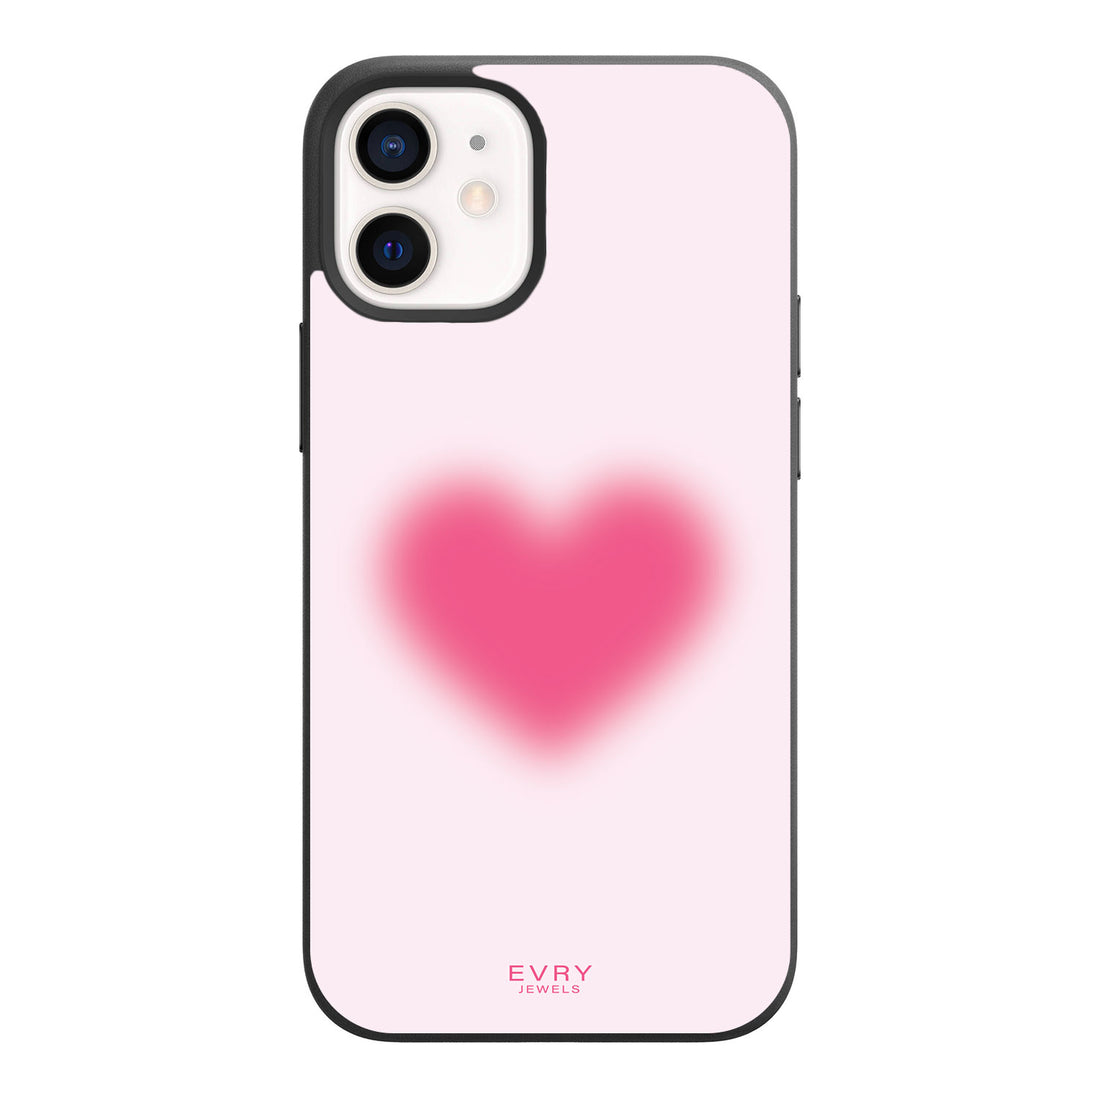 Give Me Love Phone Case